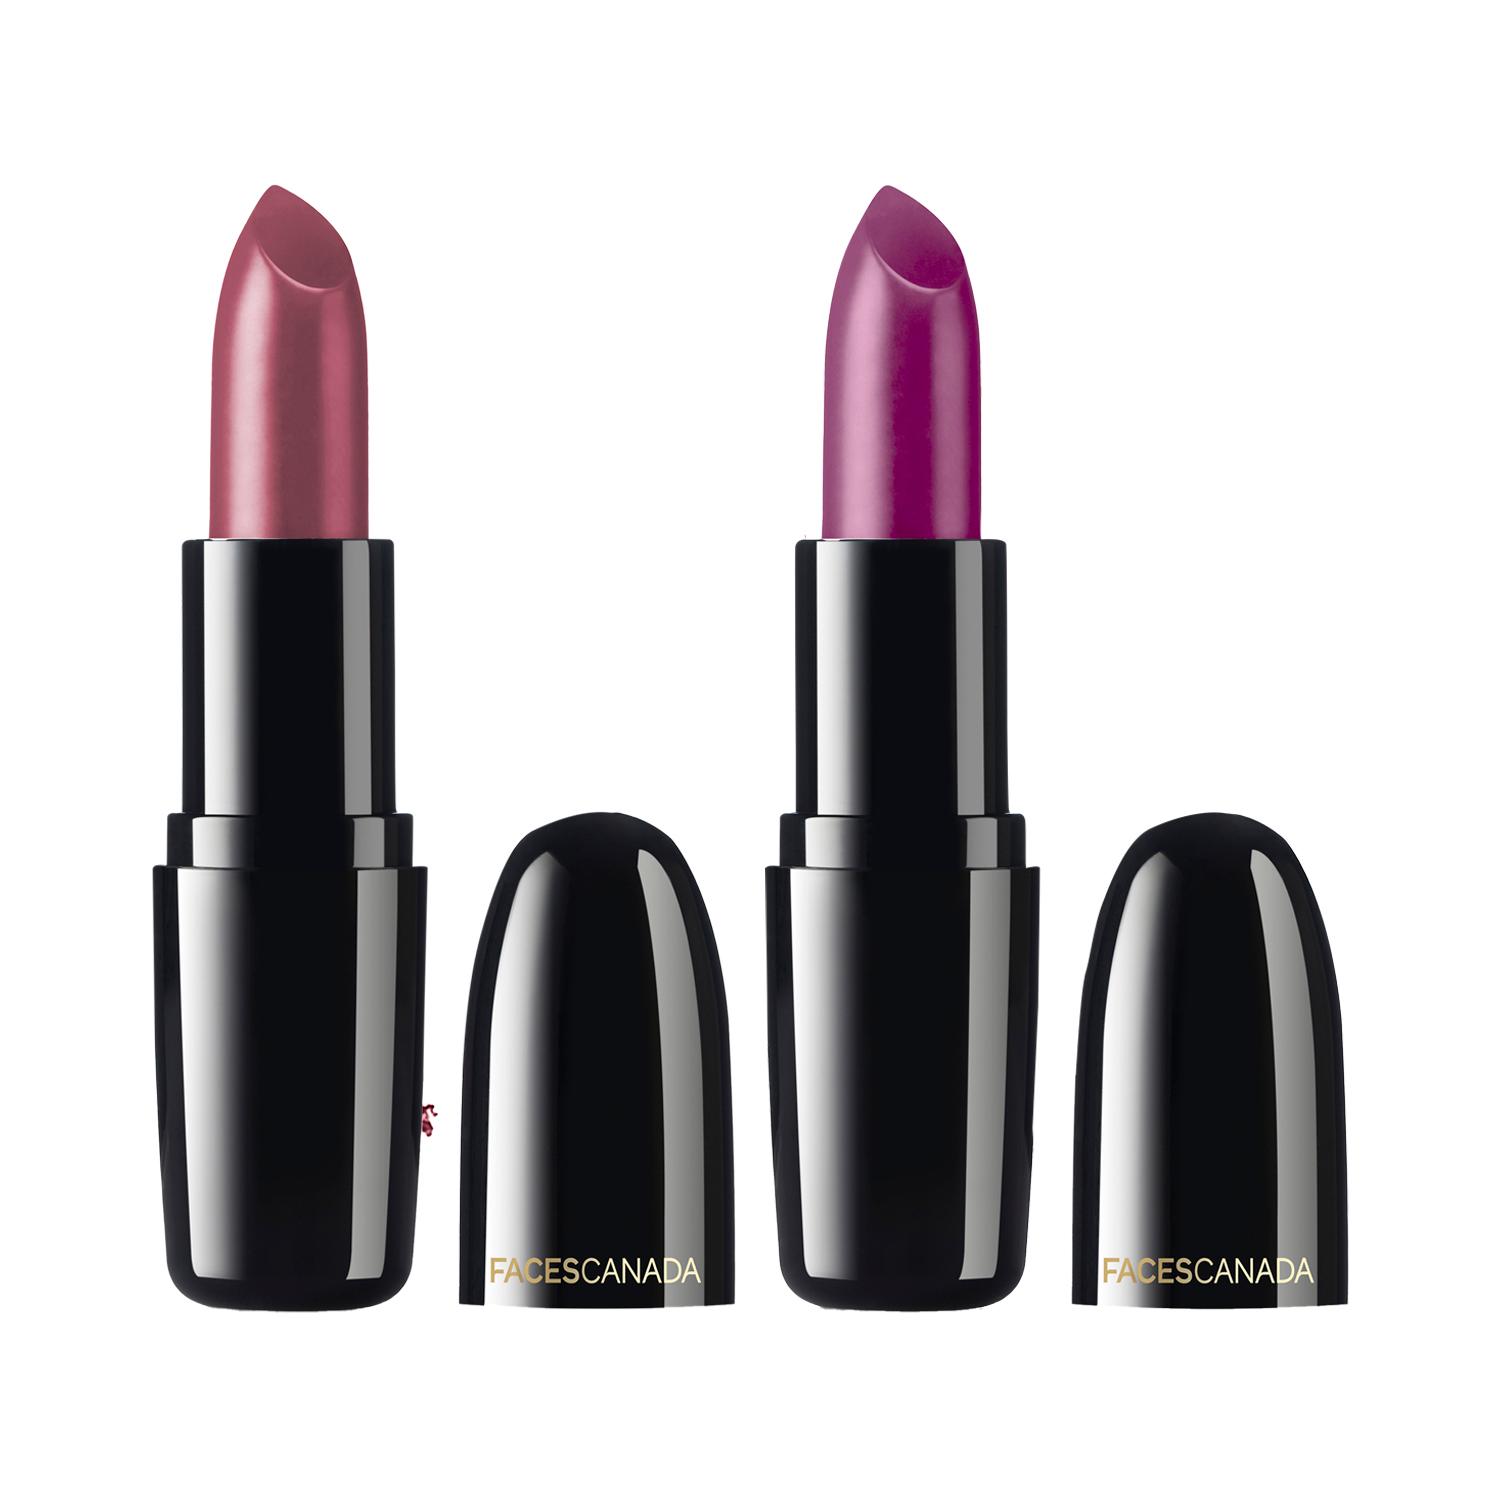 Faces Canada | Faces Canada Weightless Creme Finish Lipstick - Imperial Plum and Plum Peach (4g x 2) Combo